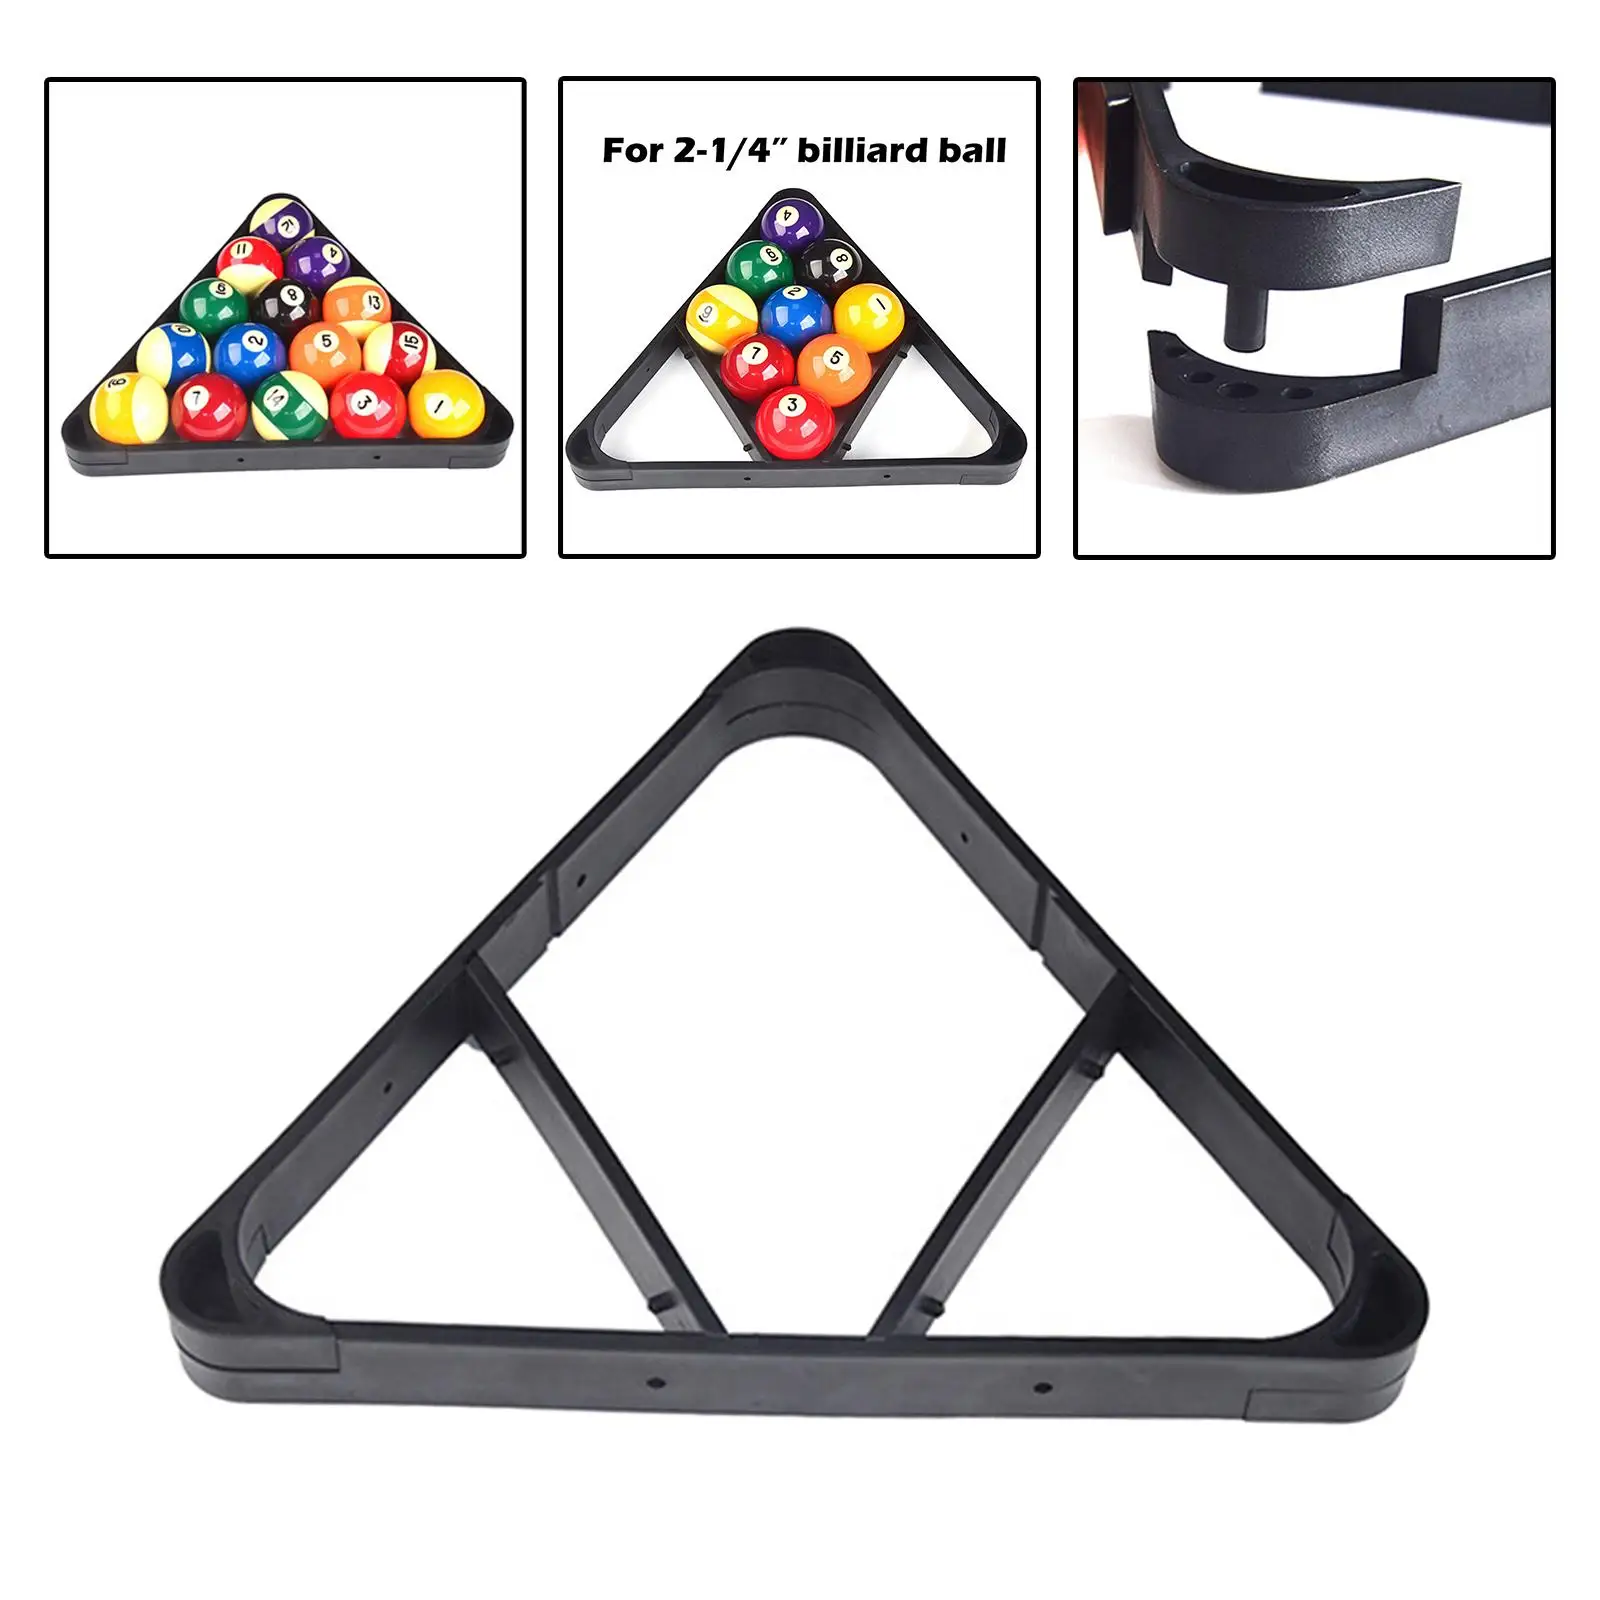 Multifunctional Billiard Triangle Ball Rack Pool Table Holders 2 in 1 Durable Pool Rack for for 2-1/ 4inch Billiard Ball